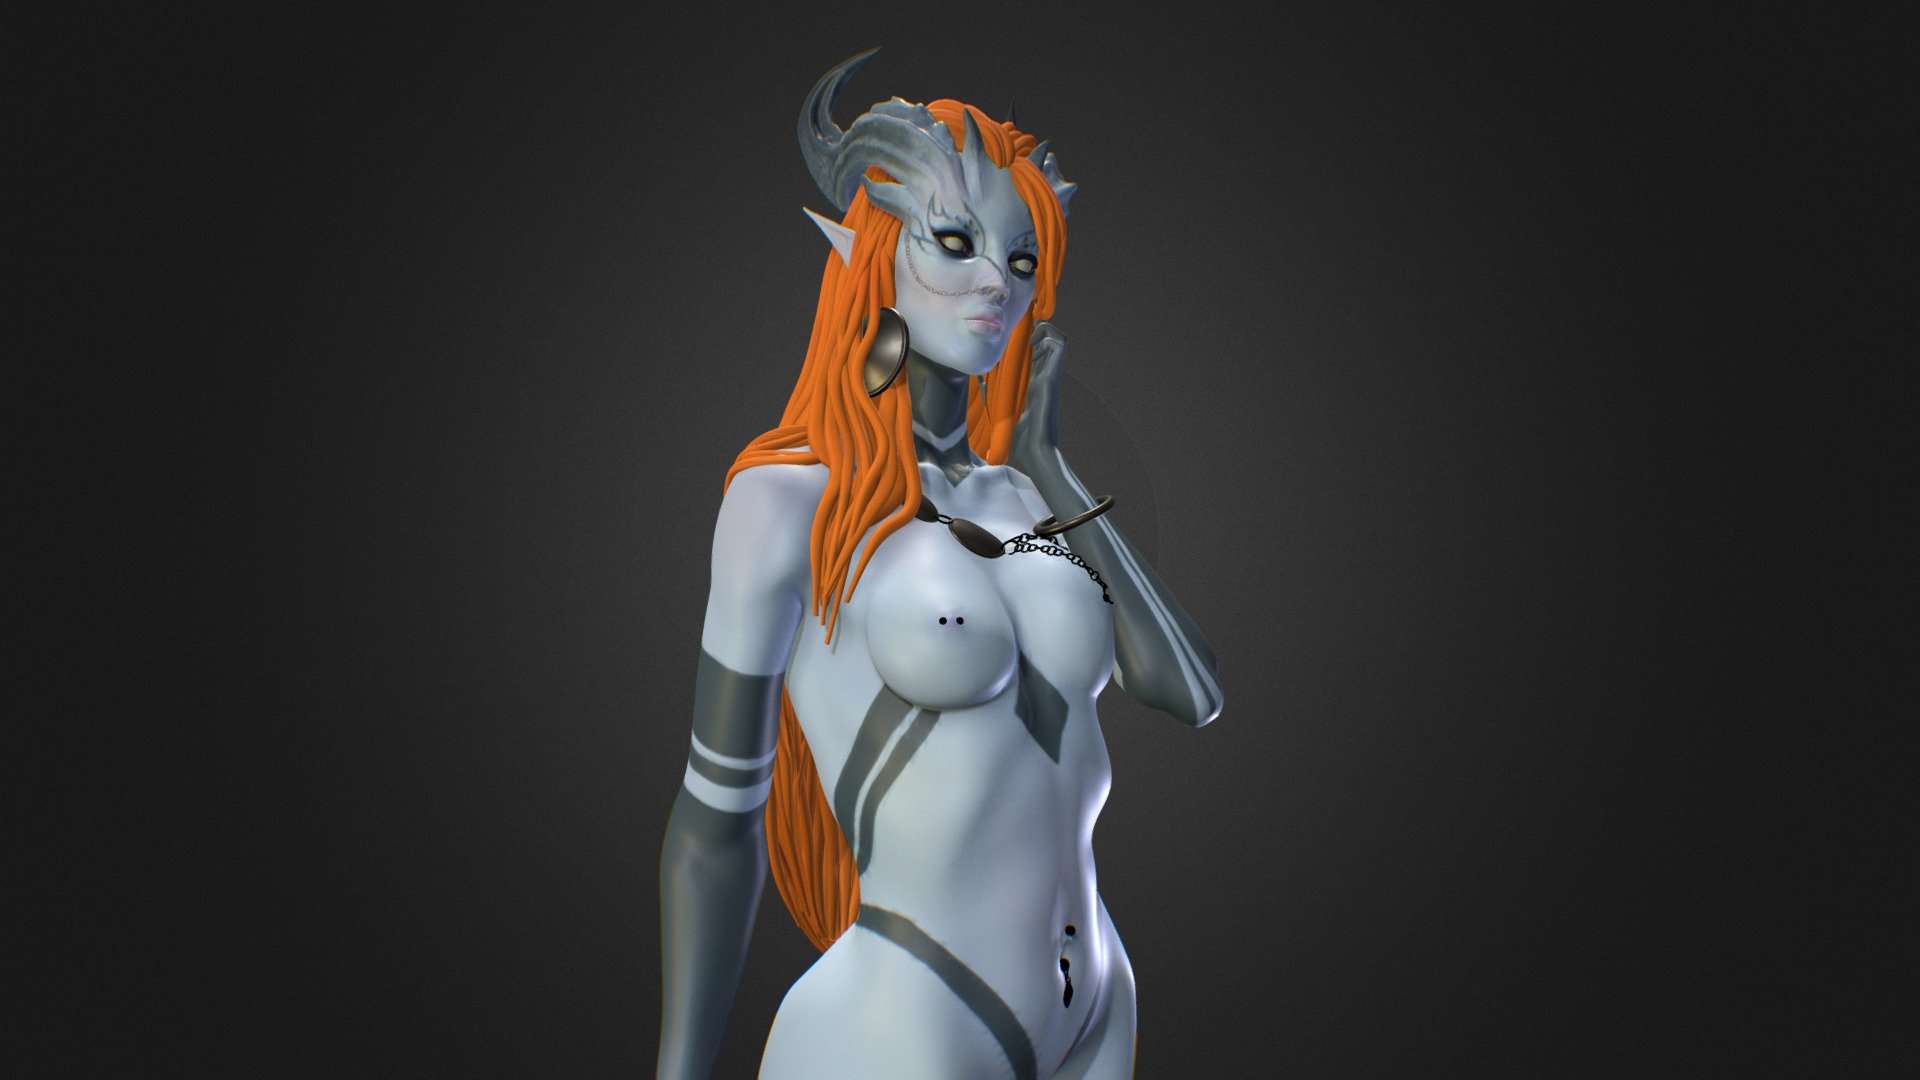 Speedsculpt, which is based on the Vetarmora's concept.
Tryed some new (for me) features of making UVs and baking normals in ZBrush. While the sculpt part was quite fast, working on UVs, textures and render took much more time&hellip;

Soft: ZBrush, Photoshop, Blender
You can also look at some renders on my ArtStation - Redhead - 3D model by Anna Mikhailova (@ocupofteao) 3d model